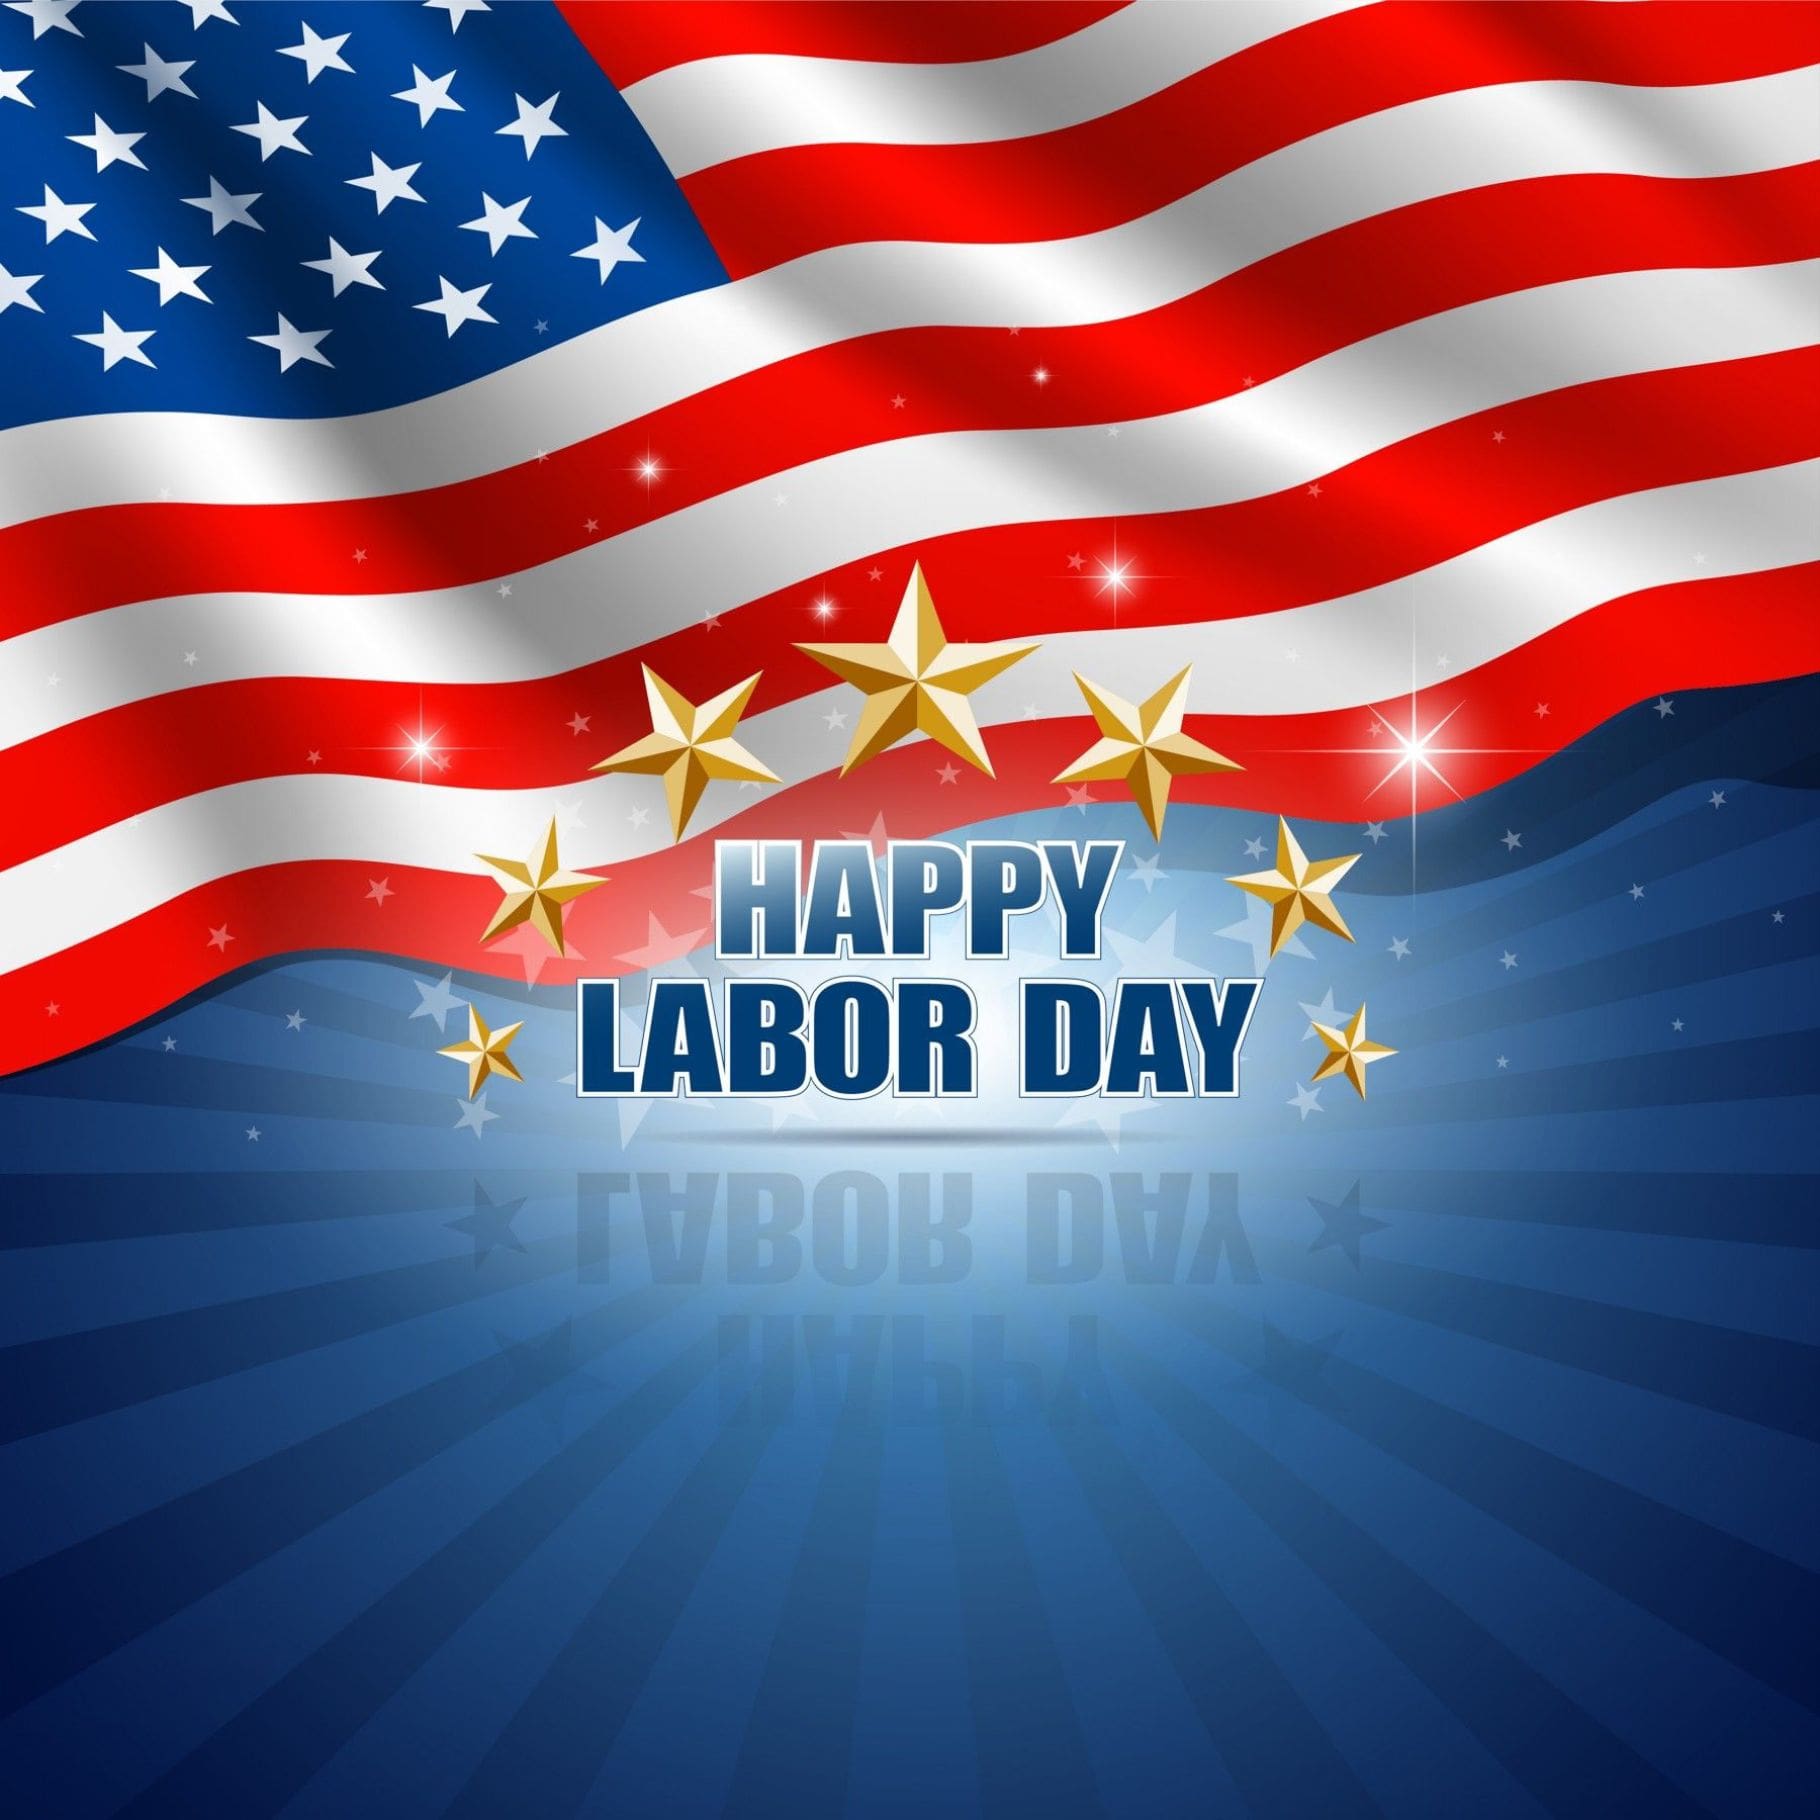 happy labor day images free 